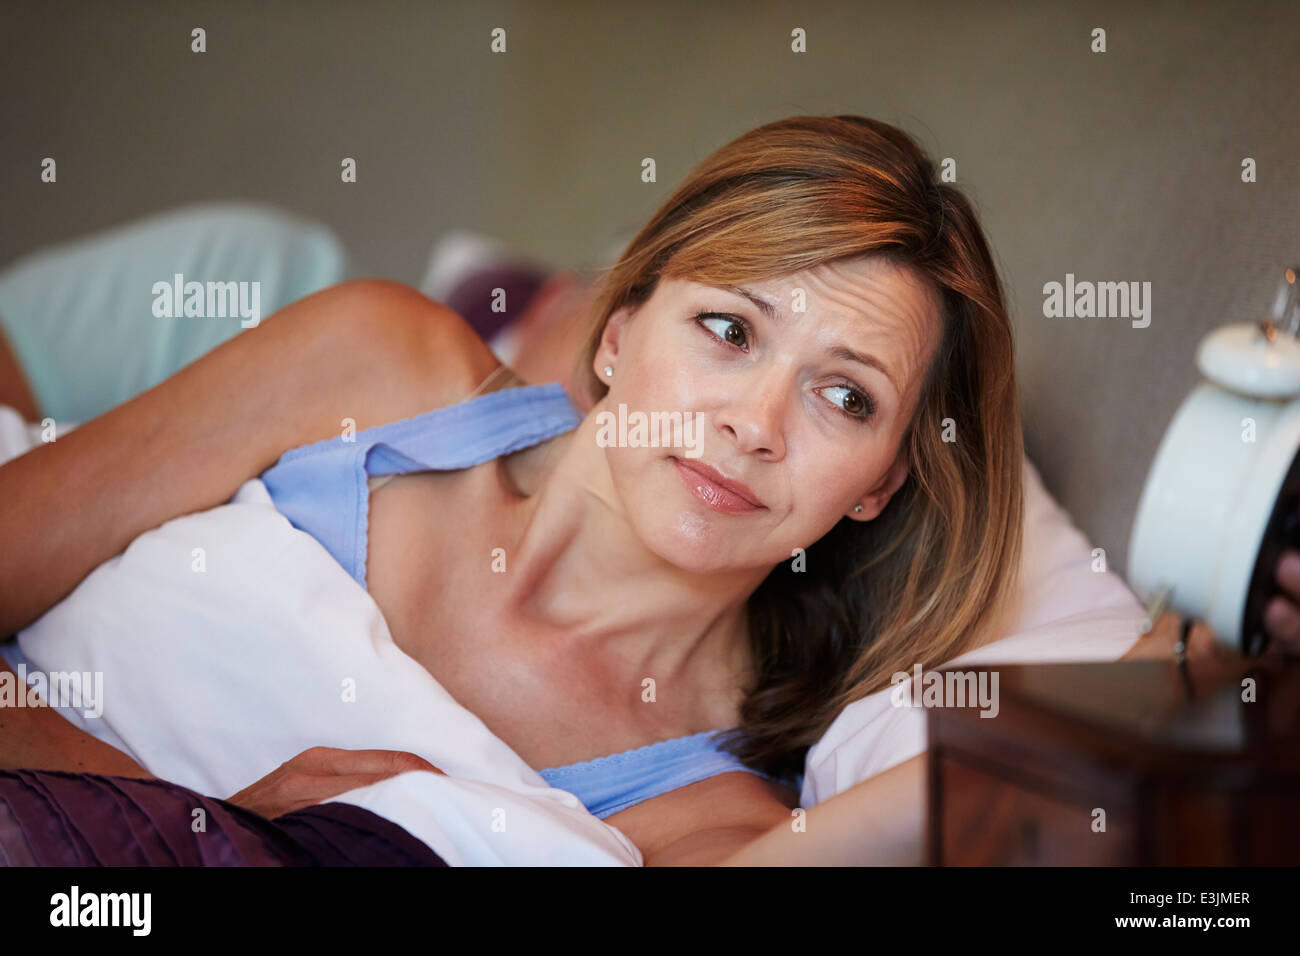 Couple In Bed With Wife Suffering From Insomnia Stock Photo